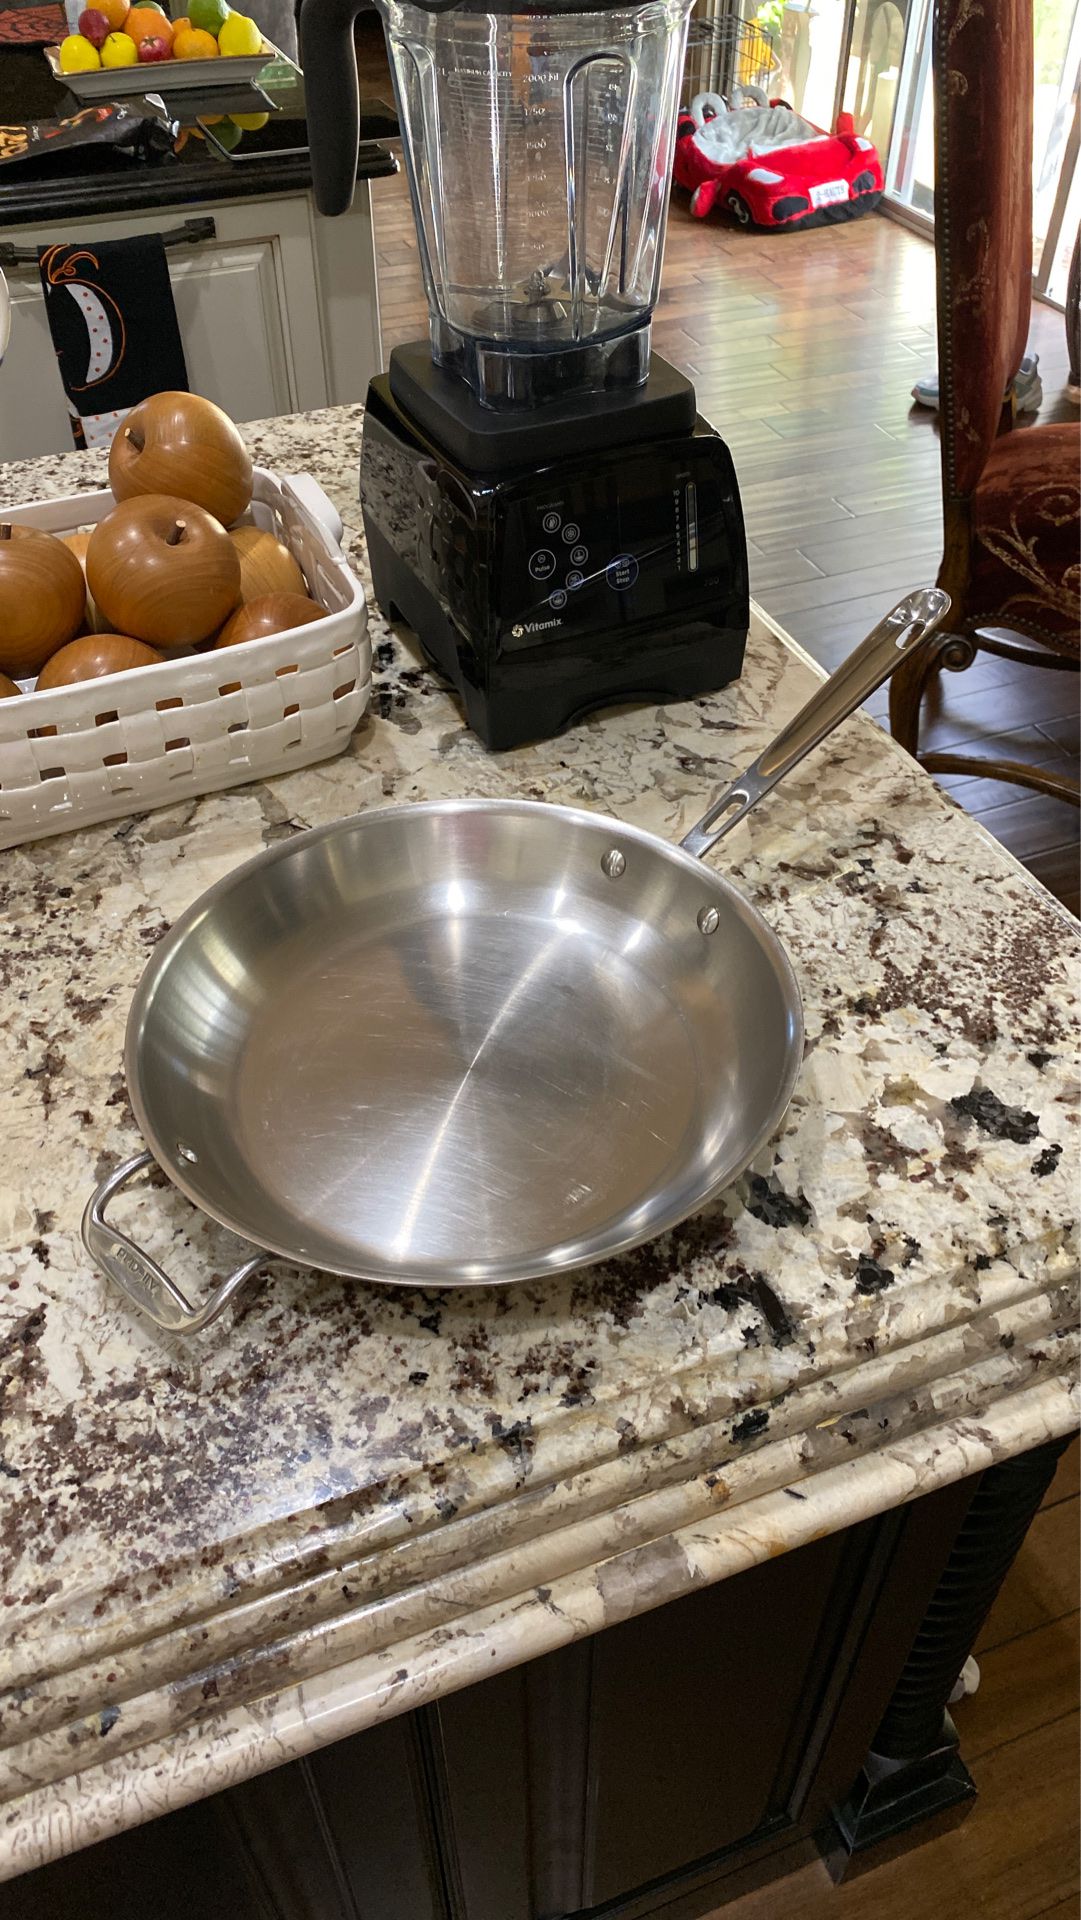 Copper core all-clad fry pan